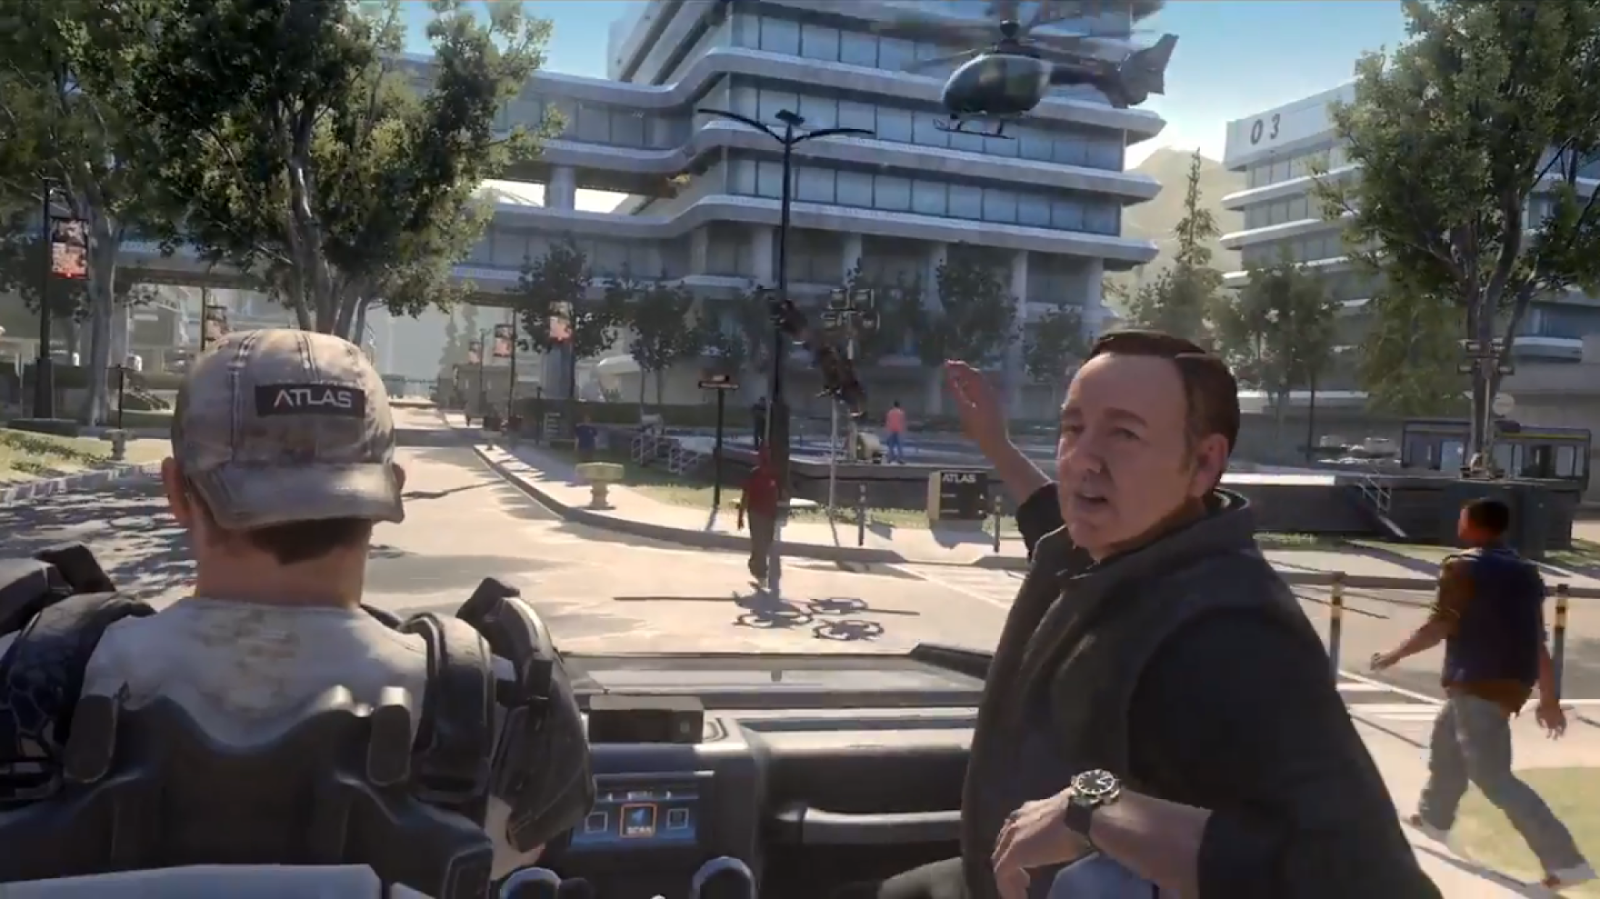 Troy Baker on Crazy Kevin Spacey Experience in CALL OF DUTY: ADVANCED  WARFARE 